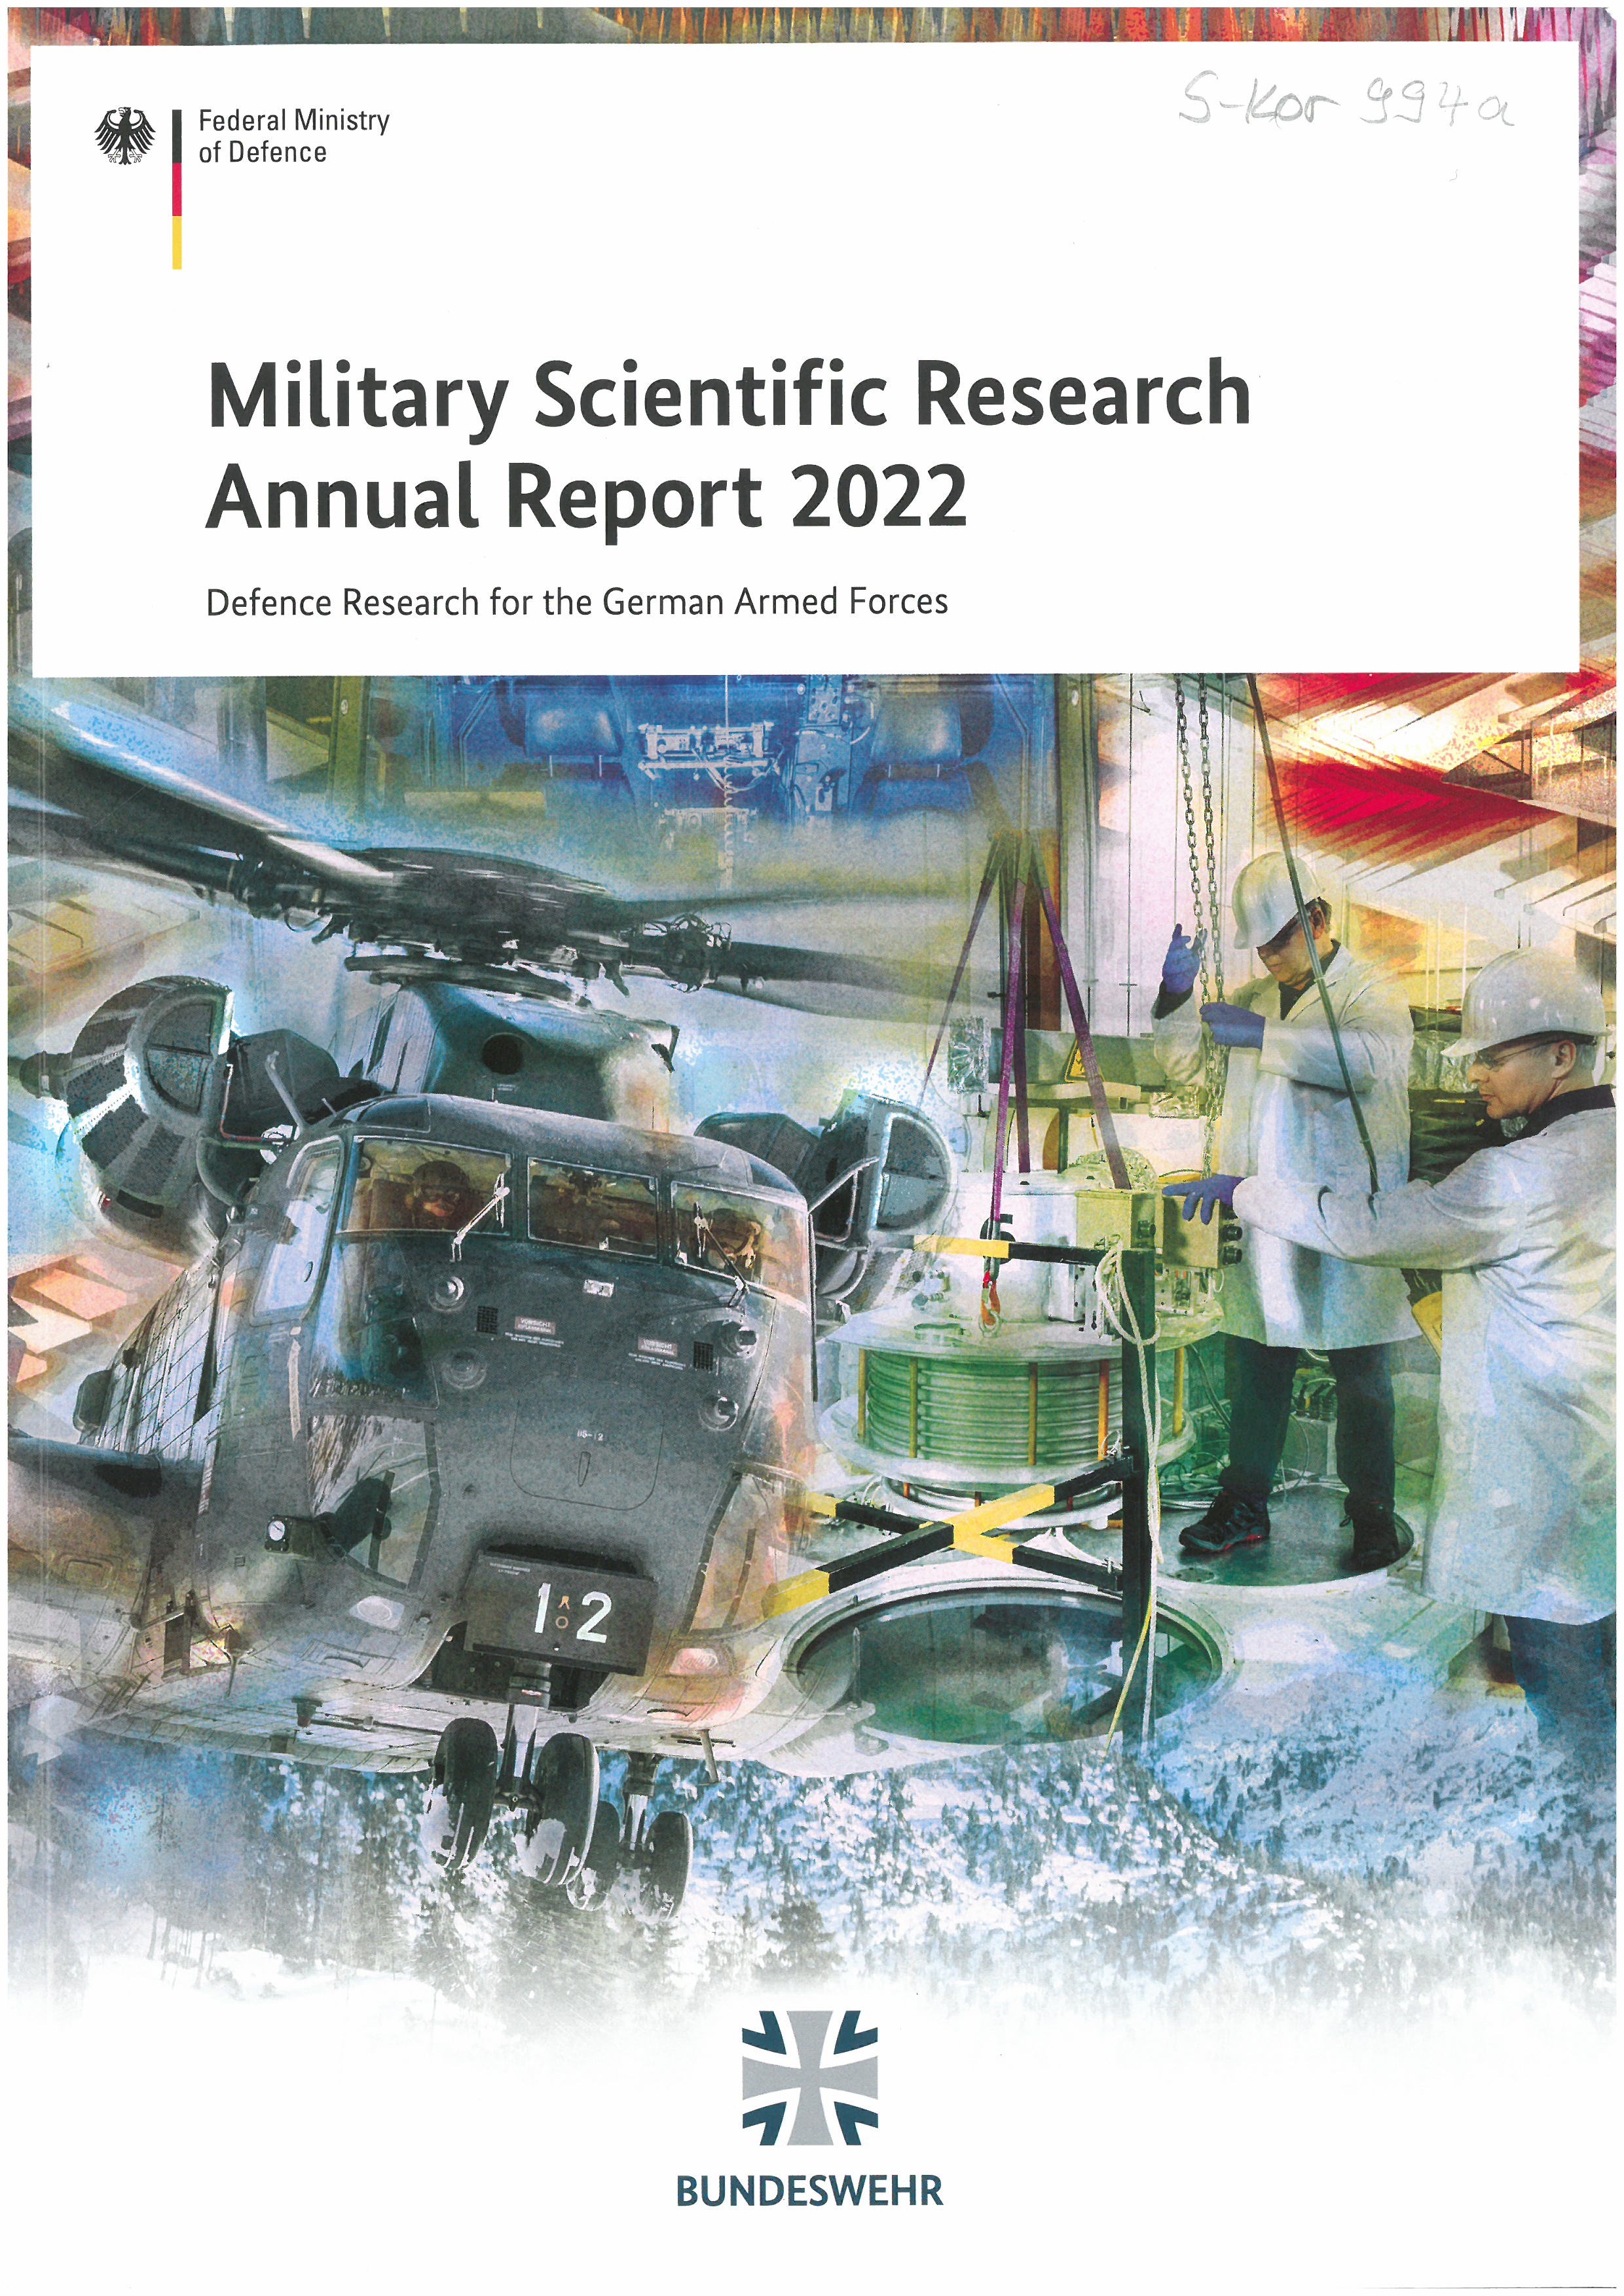 Military scientific research annual report : defence research for the German armed forces. 2022